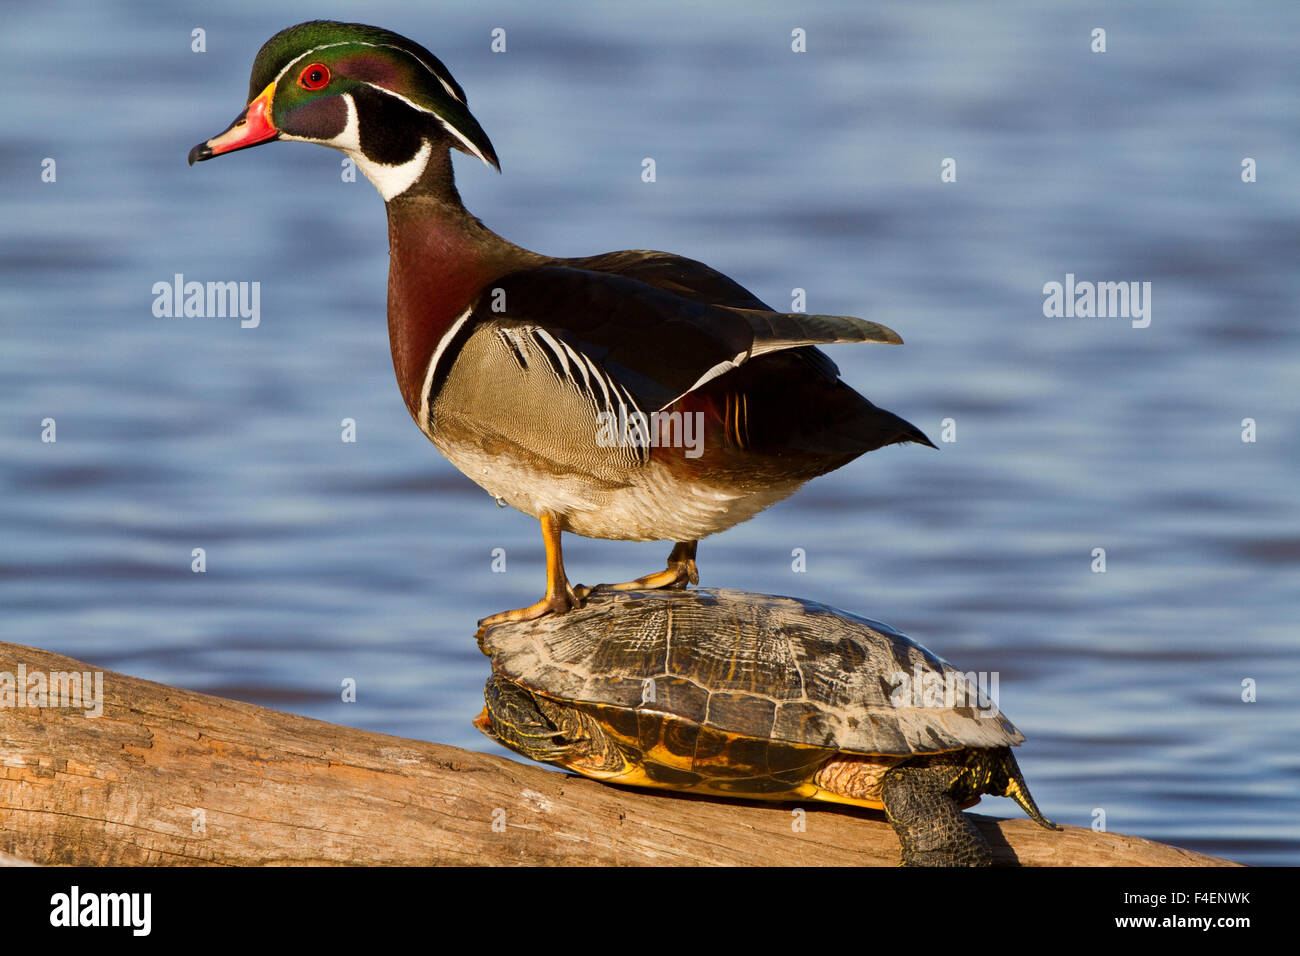 Wood Duck (Aix sponsa) male standing on Red-eared Slider (Trachemys scripta elegans) on log in wetland, Marion Co. IL Stock Photo